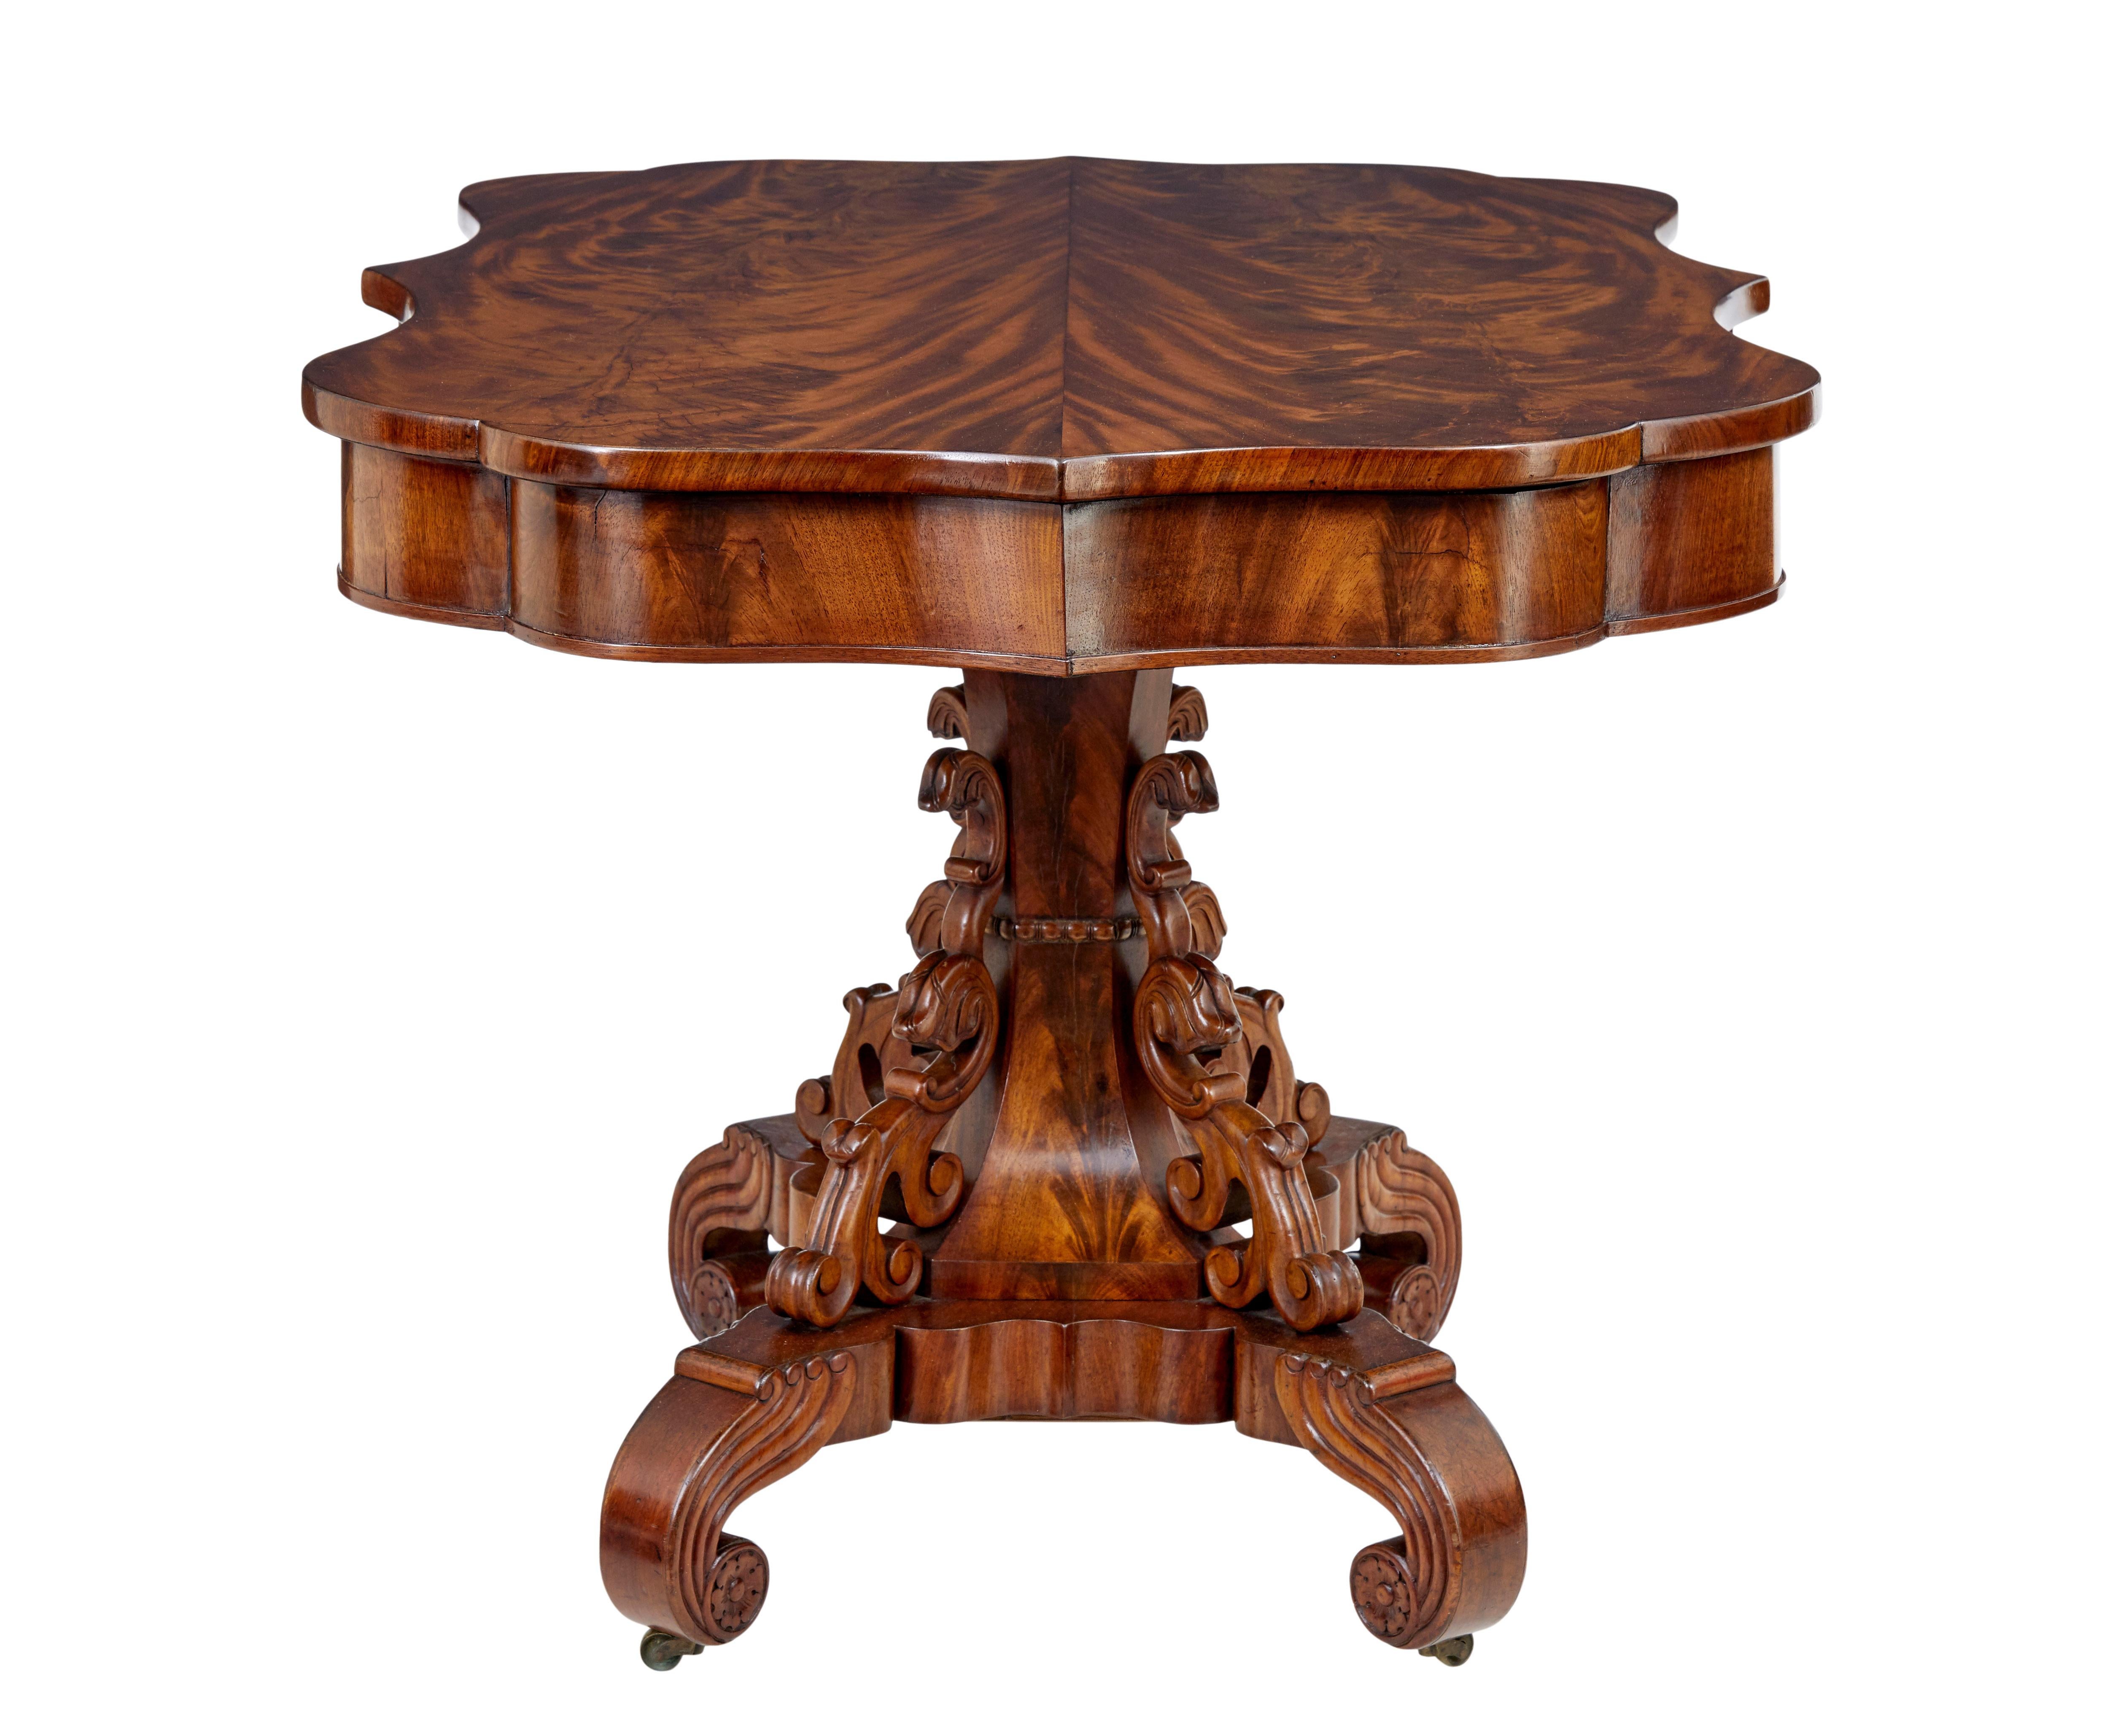 19th Century Danish Carved Flame Mahogany Center Table In Good Condition For Sale In Debenham, Suffolk